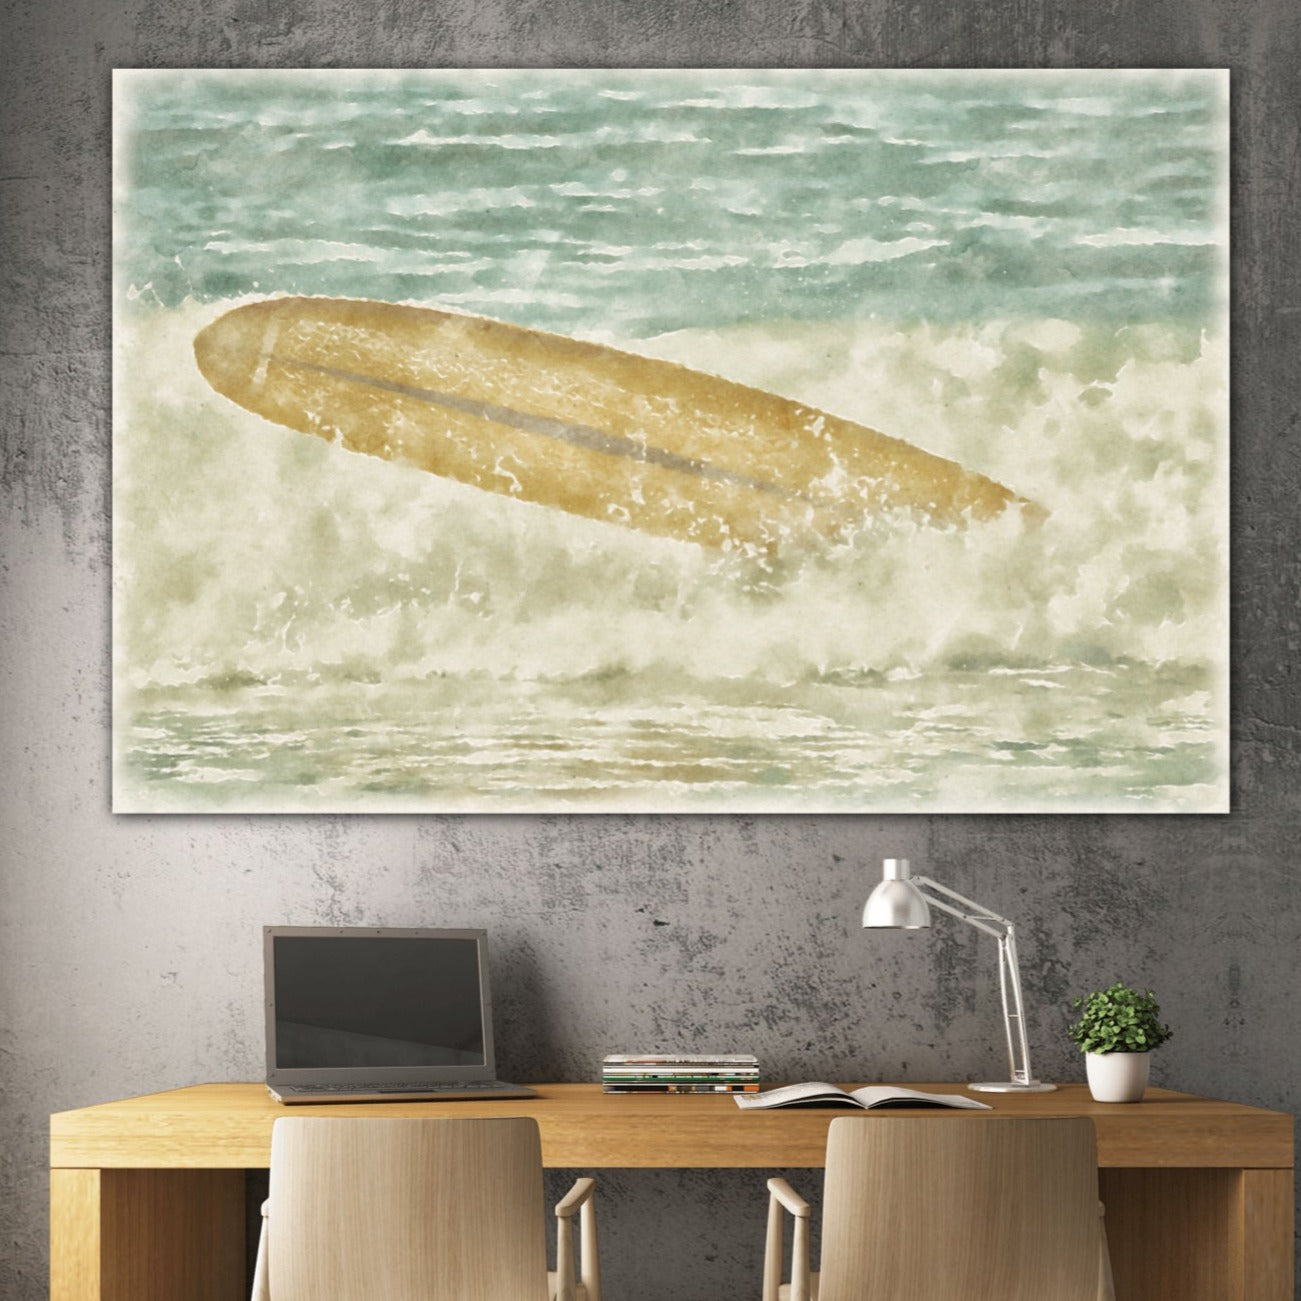 runaway surfboard acrylic print home office decor by jacqueline mb designs 